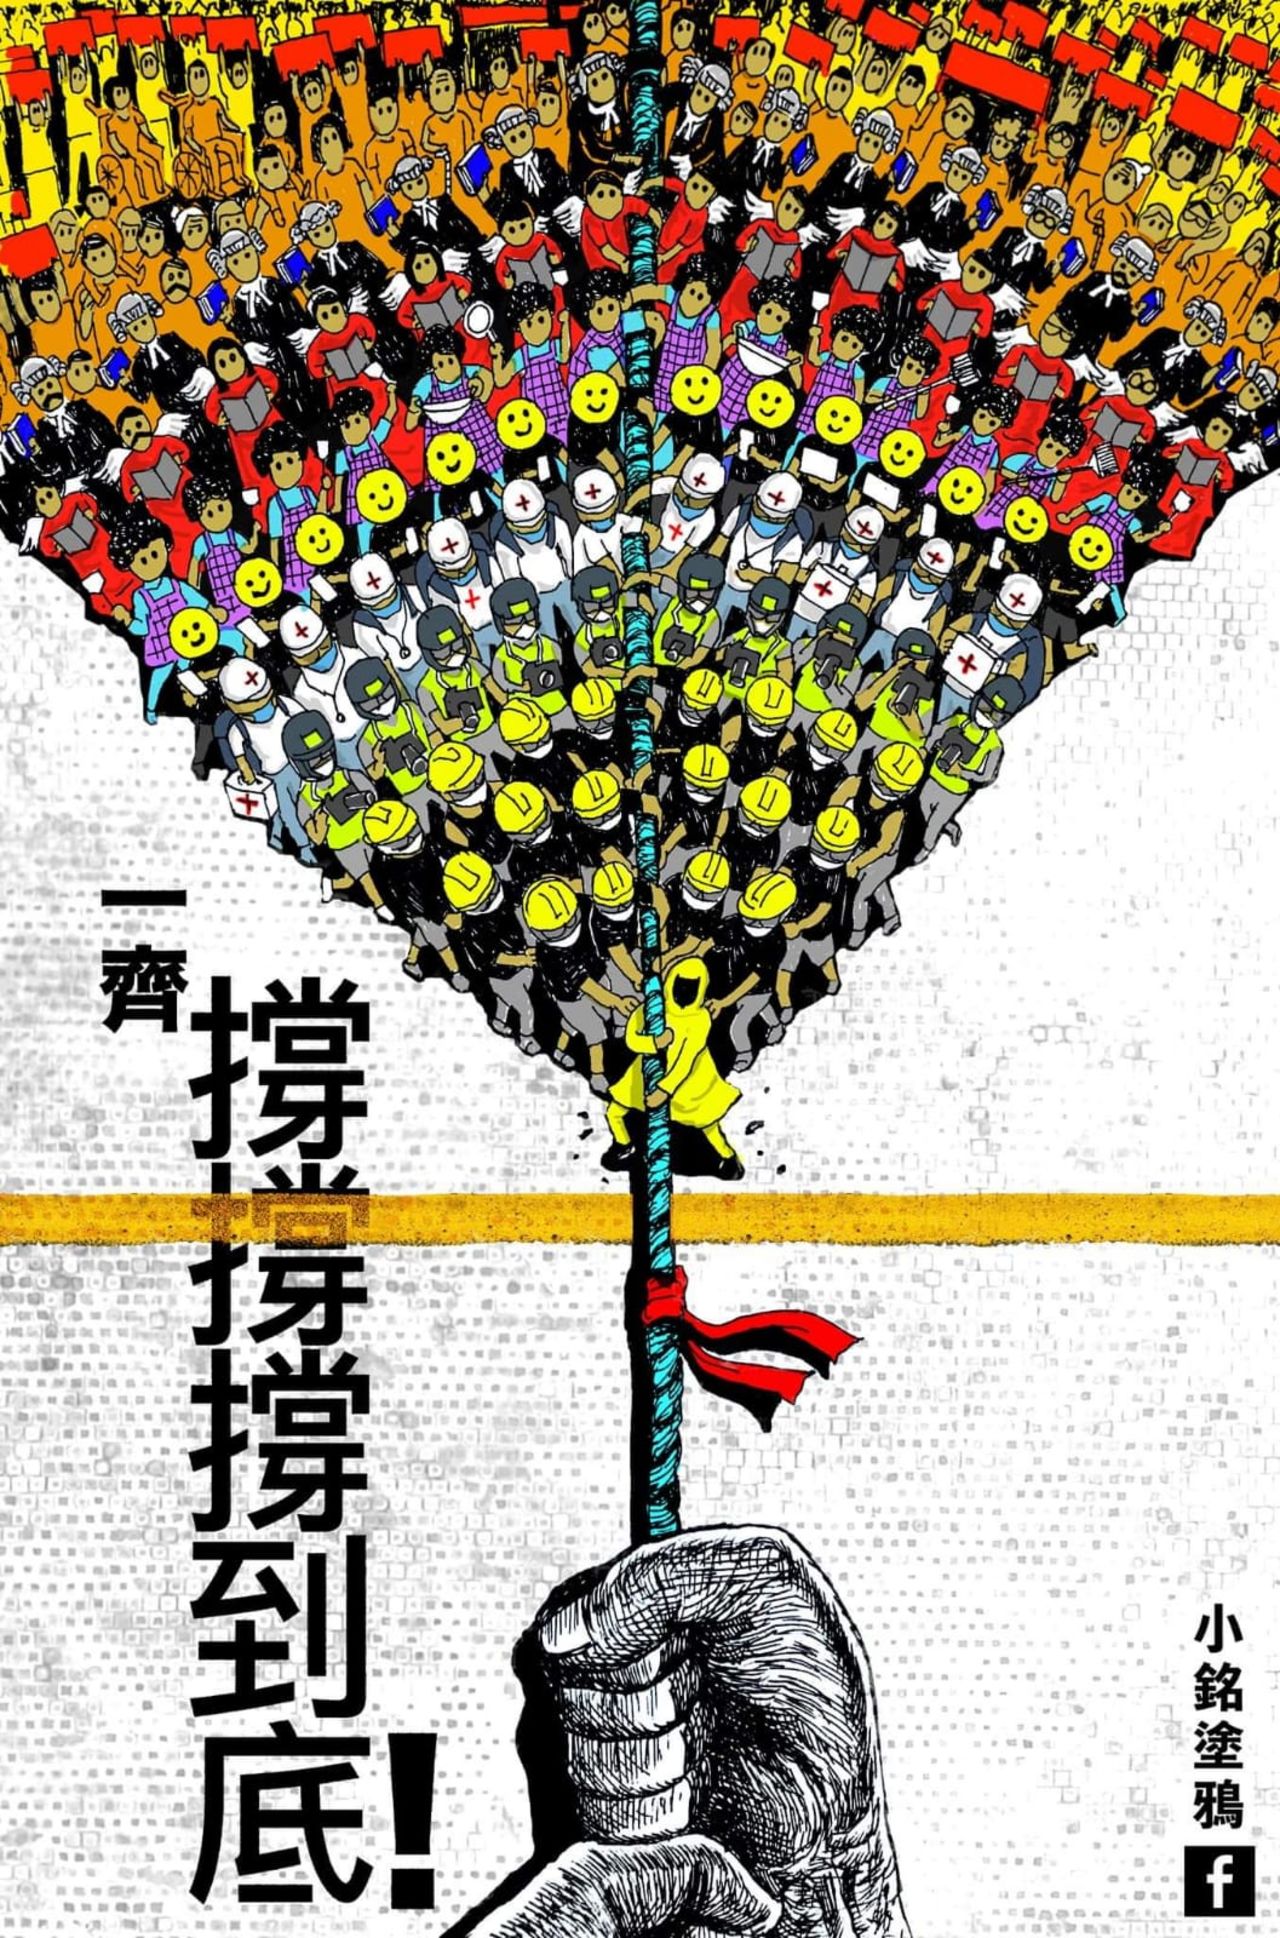 This poster encourages unity among Hong Kong people. It says "together let's support until the end." At the front of the rope is a man in a yellow raincoat. This symbolizes the first suicide associated with the Hong Kong protests. A young man fell to his death after unfurling a protest banner near government headquarters in June.